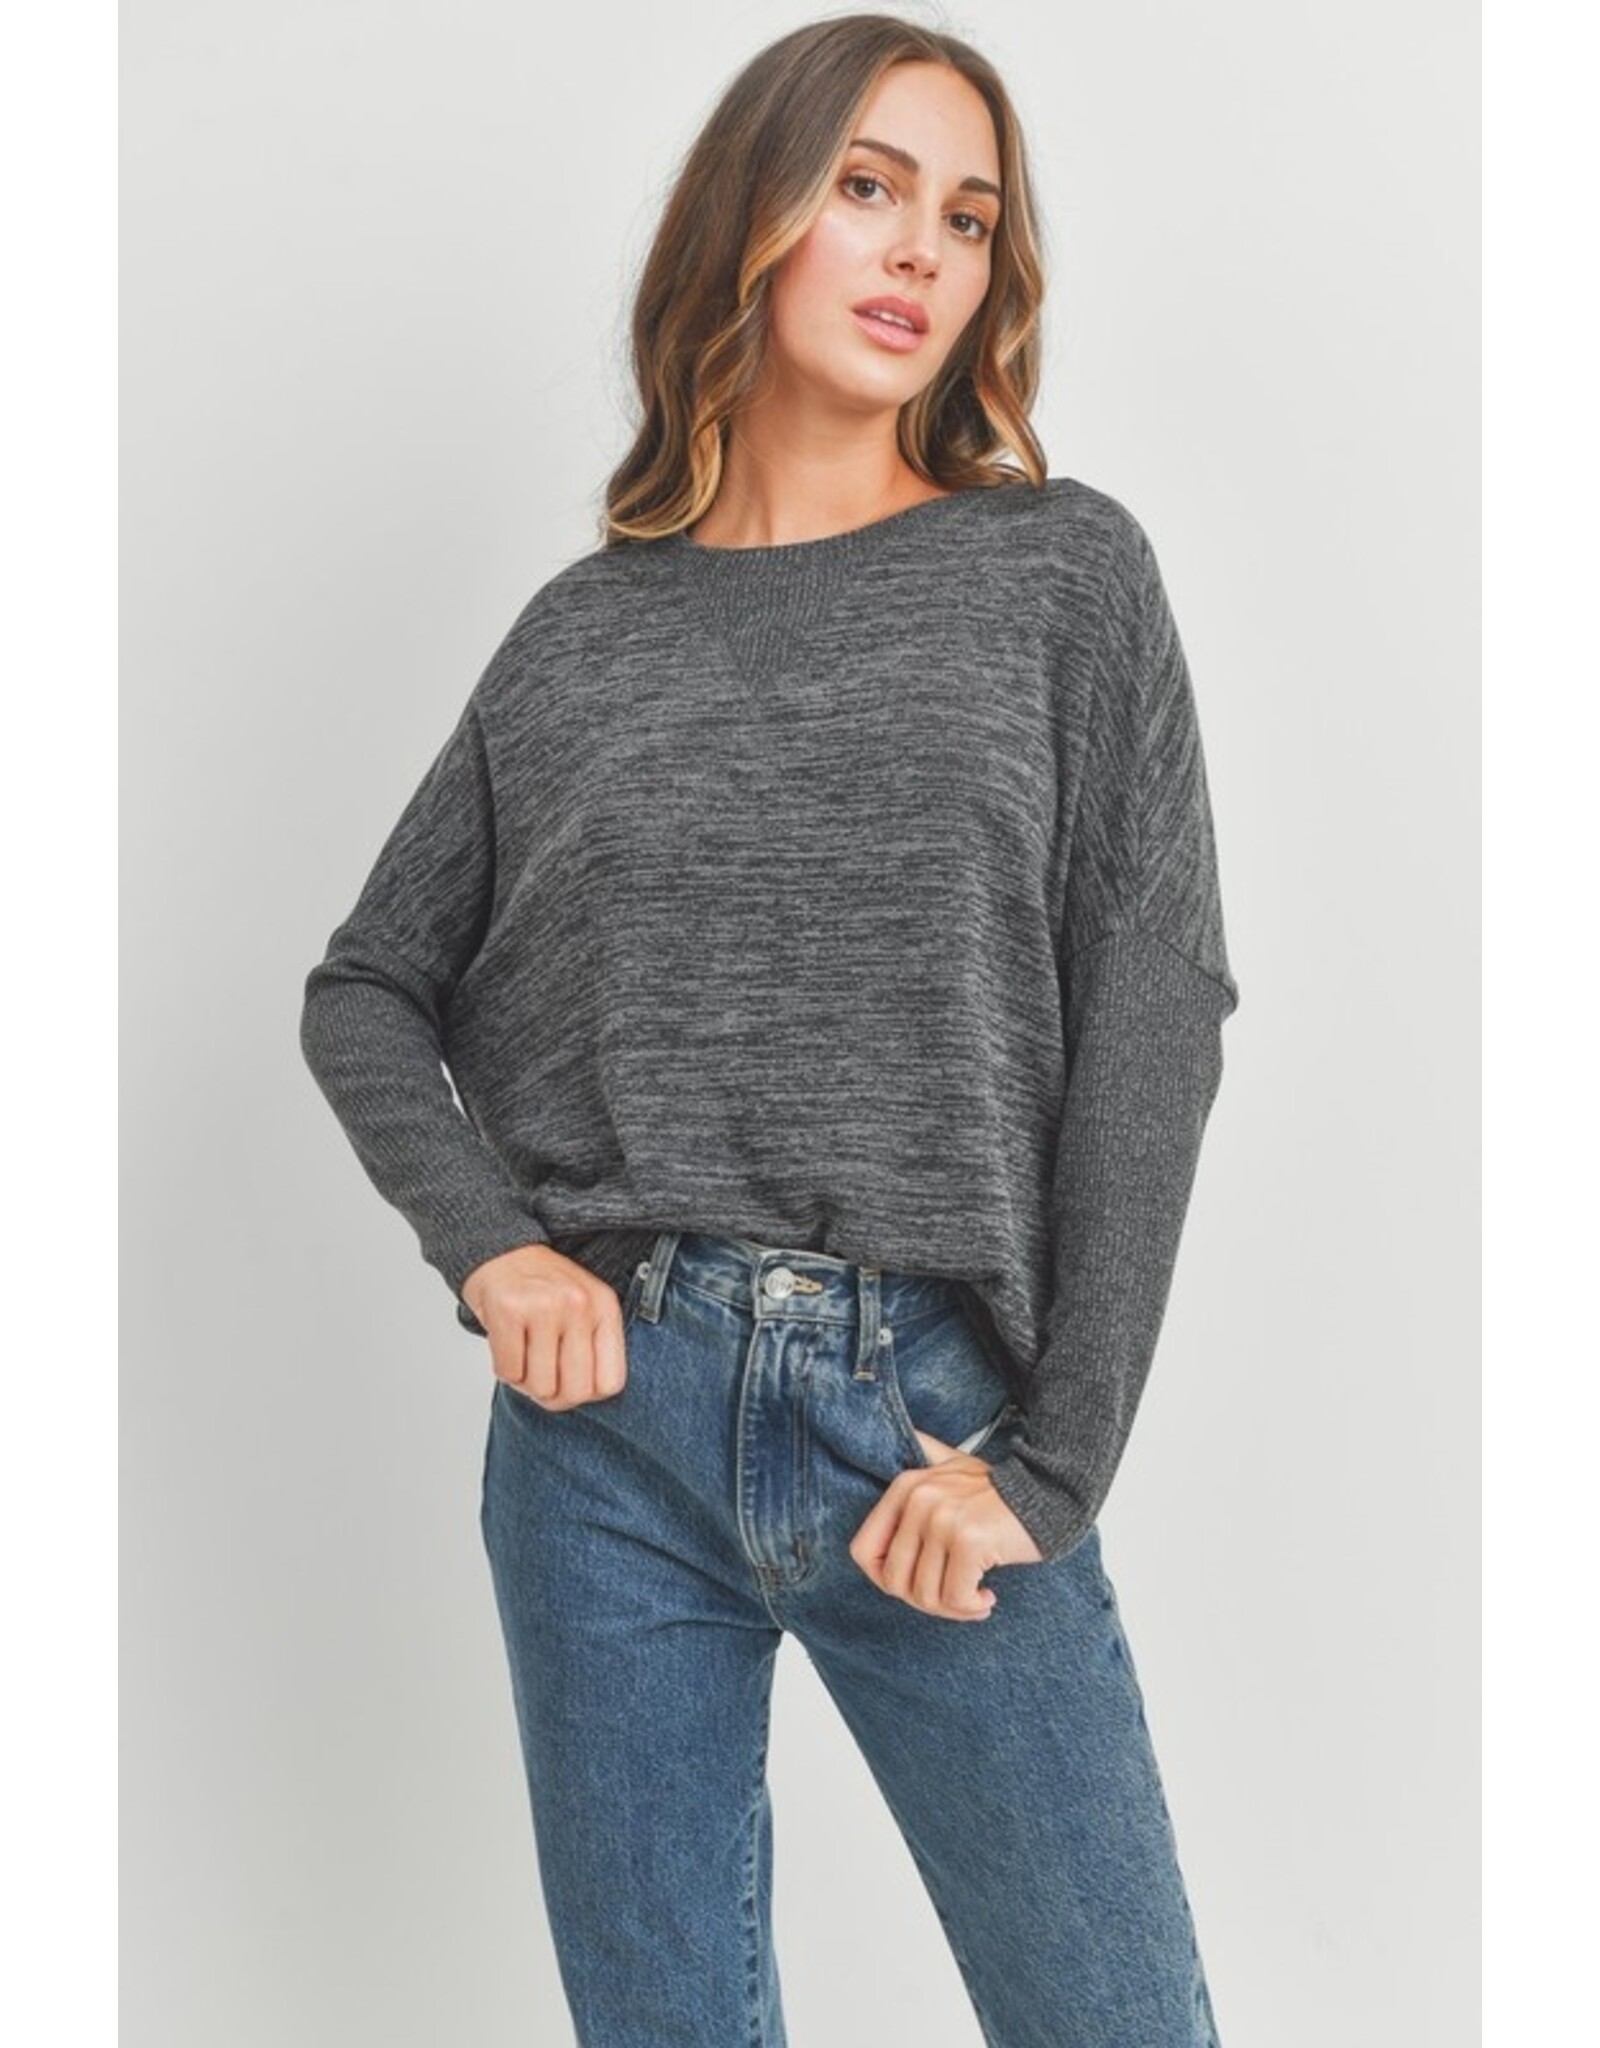 Charcoal round neck long slv